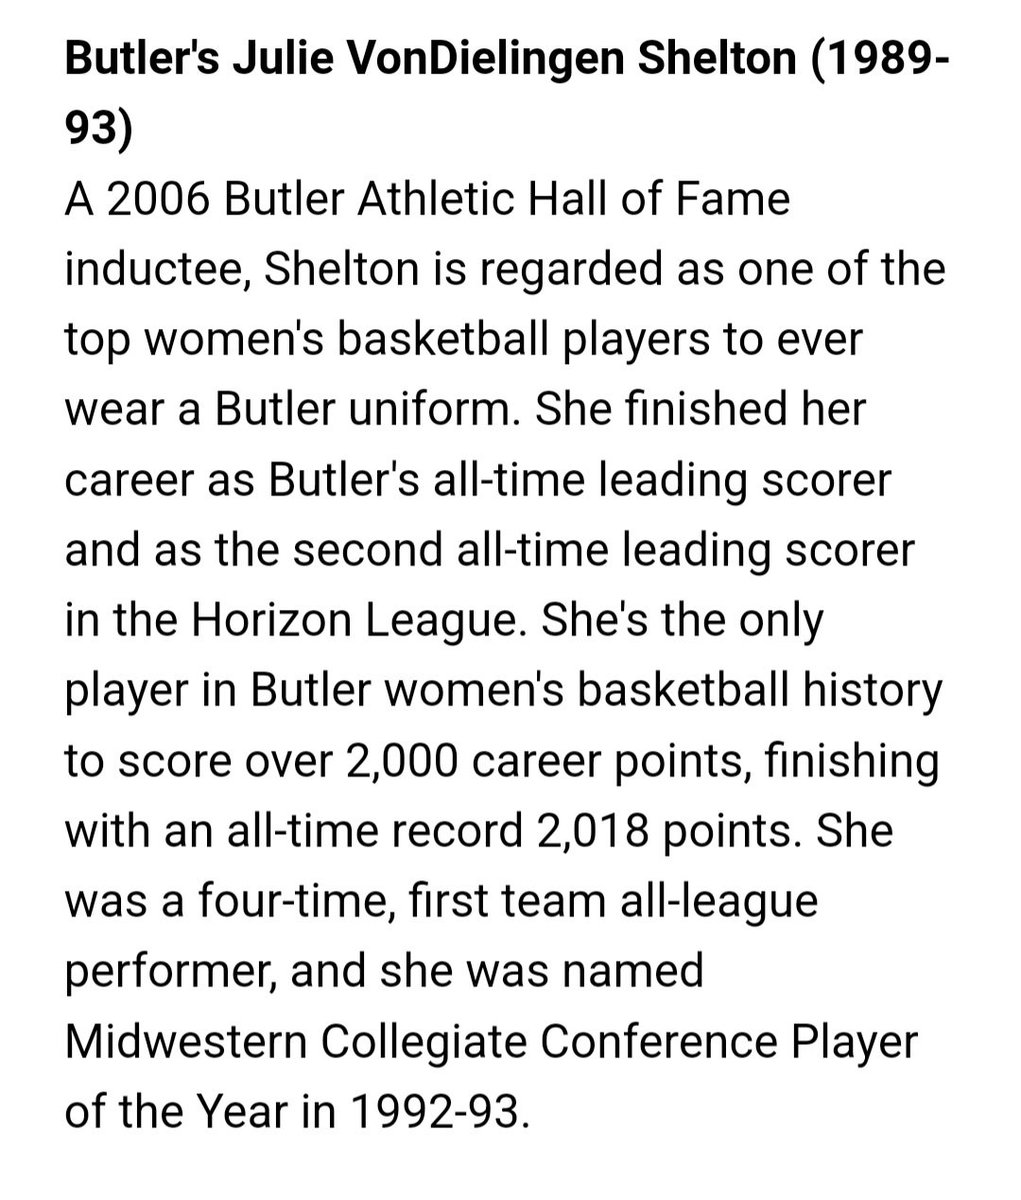 Congratulations to Coach Shelton on being recognized as a Big East Conference women's basketball Legend. 'If you look up greatness in the dictionary, it will say Michael Jordan.' ~ Elgin Baylor Hiwever, the dictionaries in Seymour, Butler, and Mt. Vernon, say Julie Shelton #GOAT